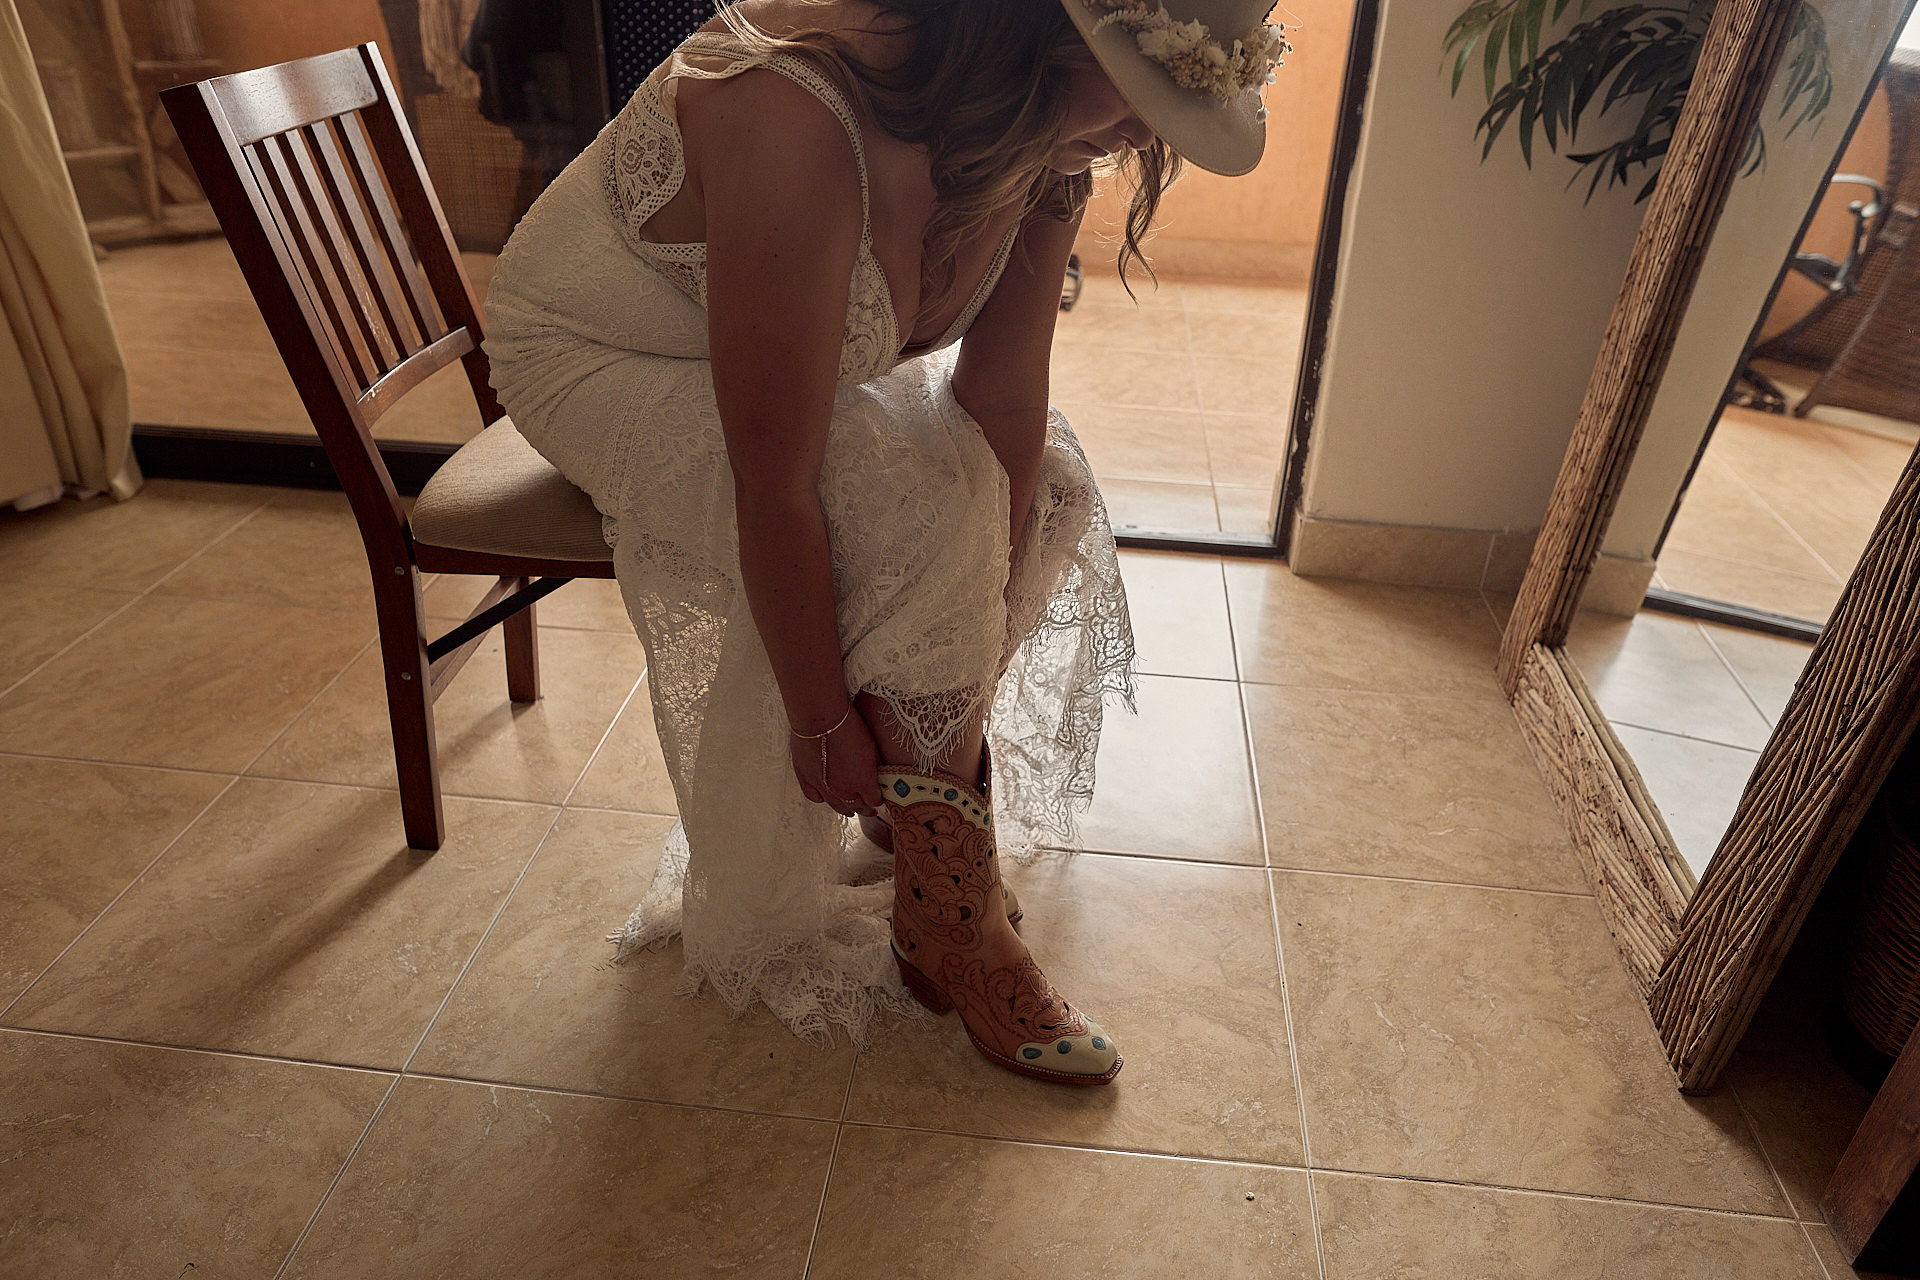 a woman in a white dress kneeling down on a tile floor.